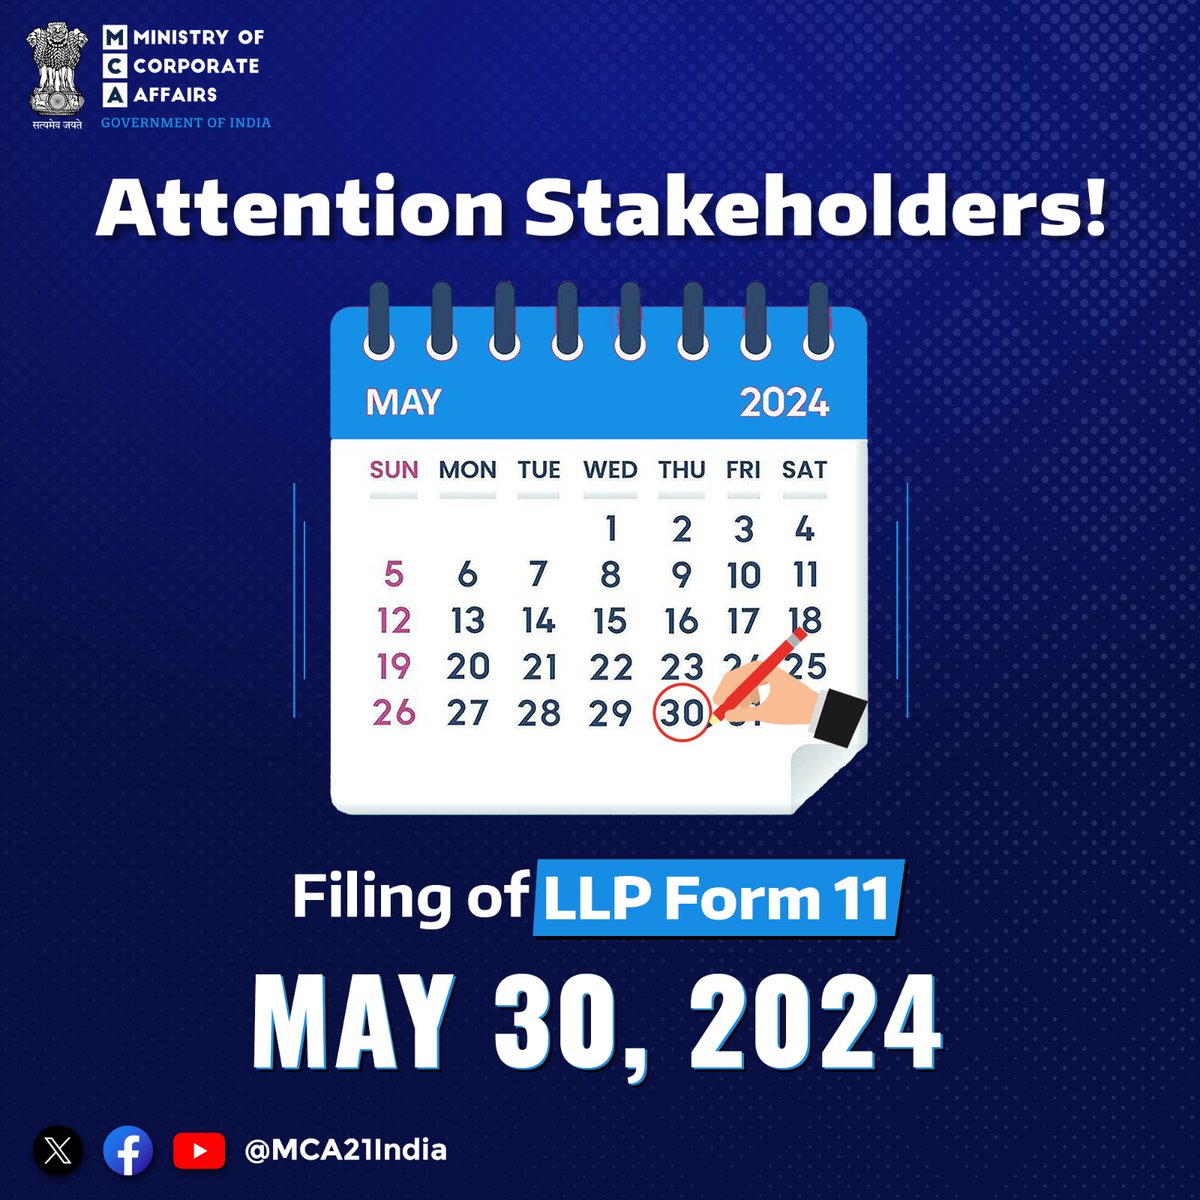 Stakeholders are requested to complete the filing of 'LLP Form 11' before the due date. Please plan accordingly to avoid any inconvenience. #MCA #MCA21 #Update #Stakeholders #Forms #LLP